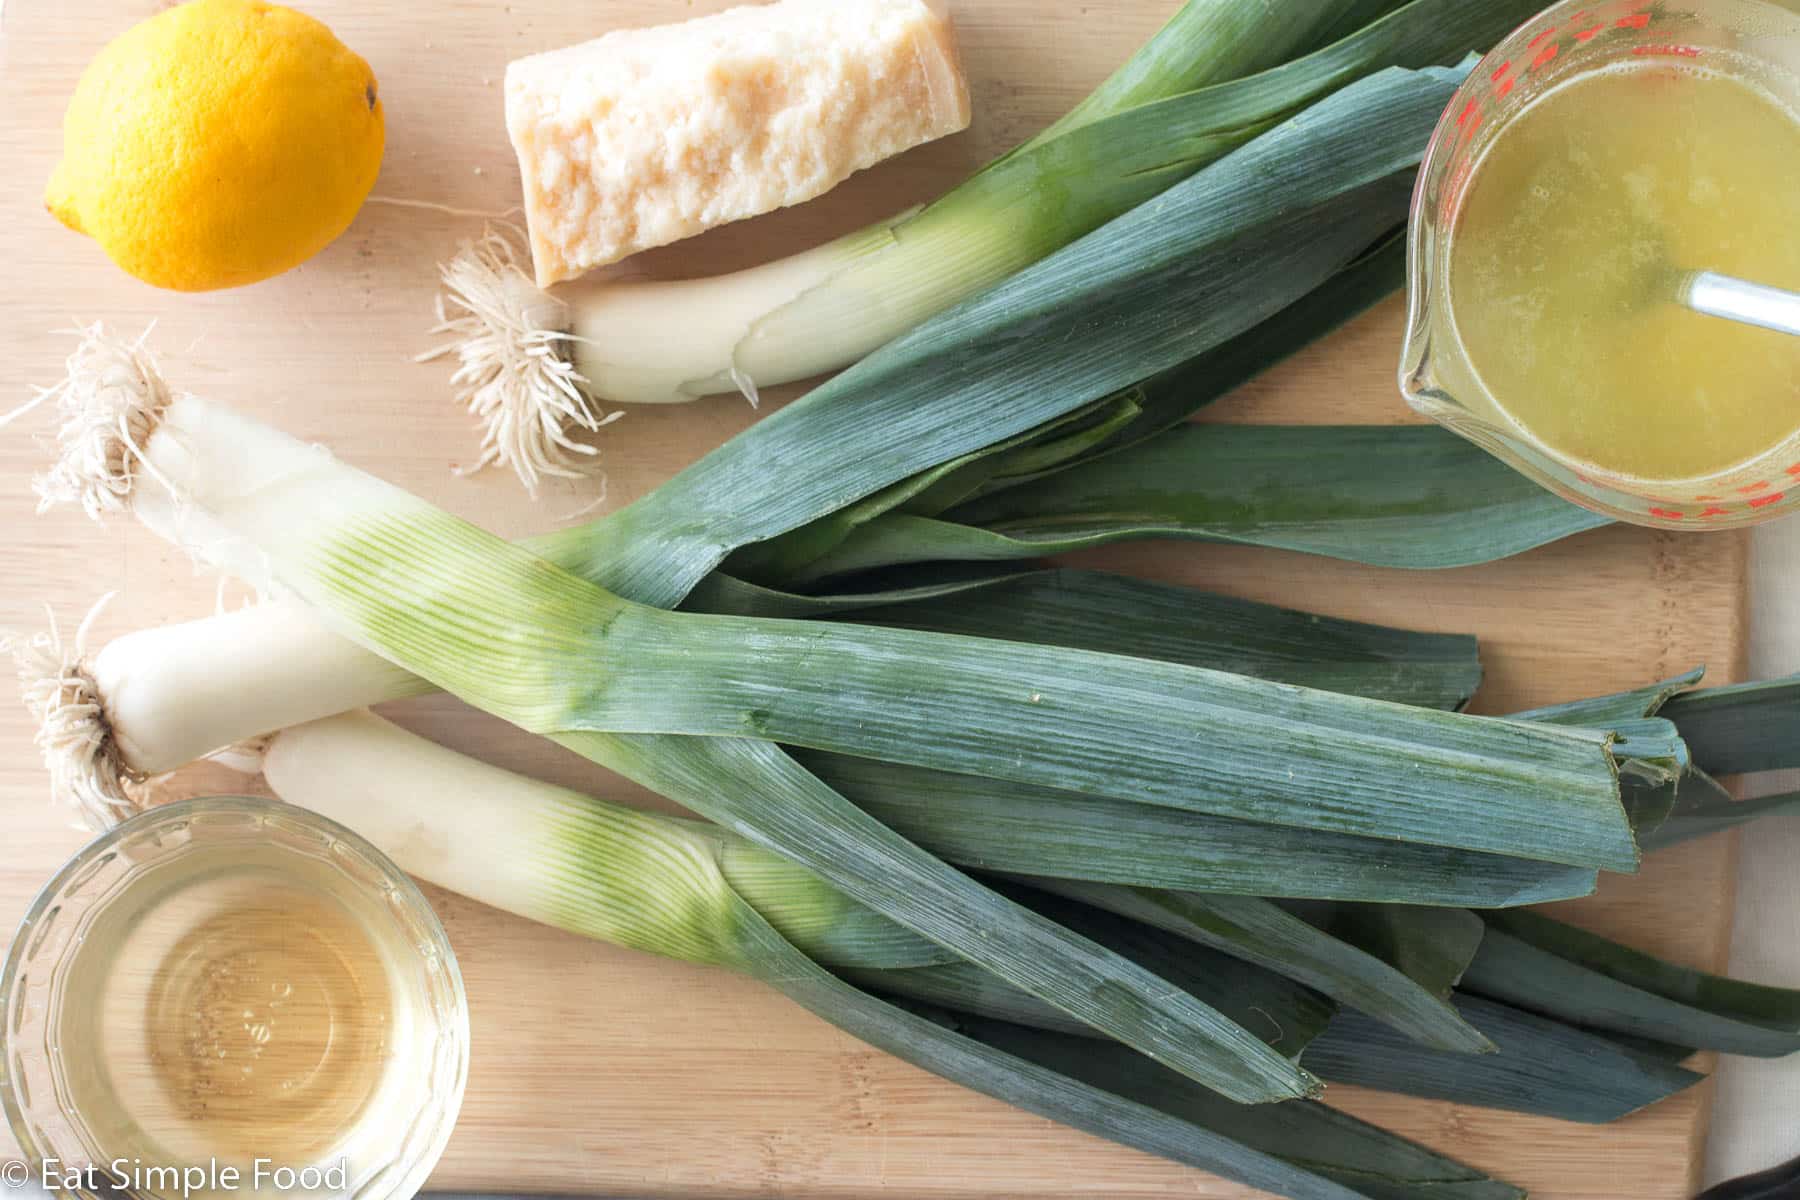 Top down view of four whole leeks, a whole lemon, a ramekin of wine, a chunk of parmesan cheese, and yellow broth in a bowl on a wood cutting board.